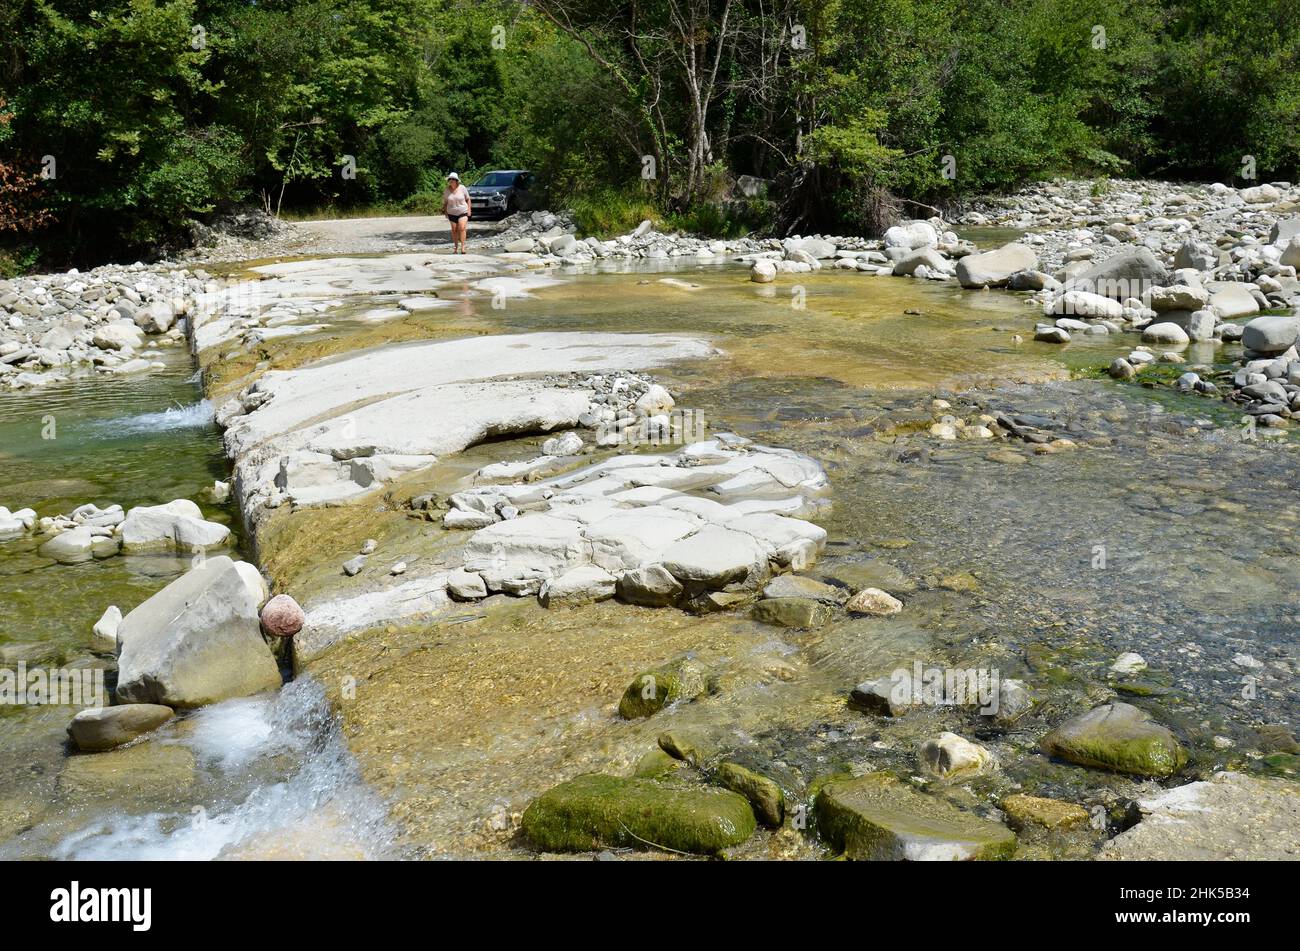 Plaka, Greece - June 30, 2021: Unknown woman on the river bank where the road became impassable in the National Park of Tzoumerka- Peristeri- Arachthos Stock Photo